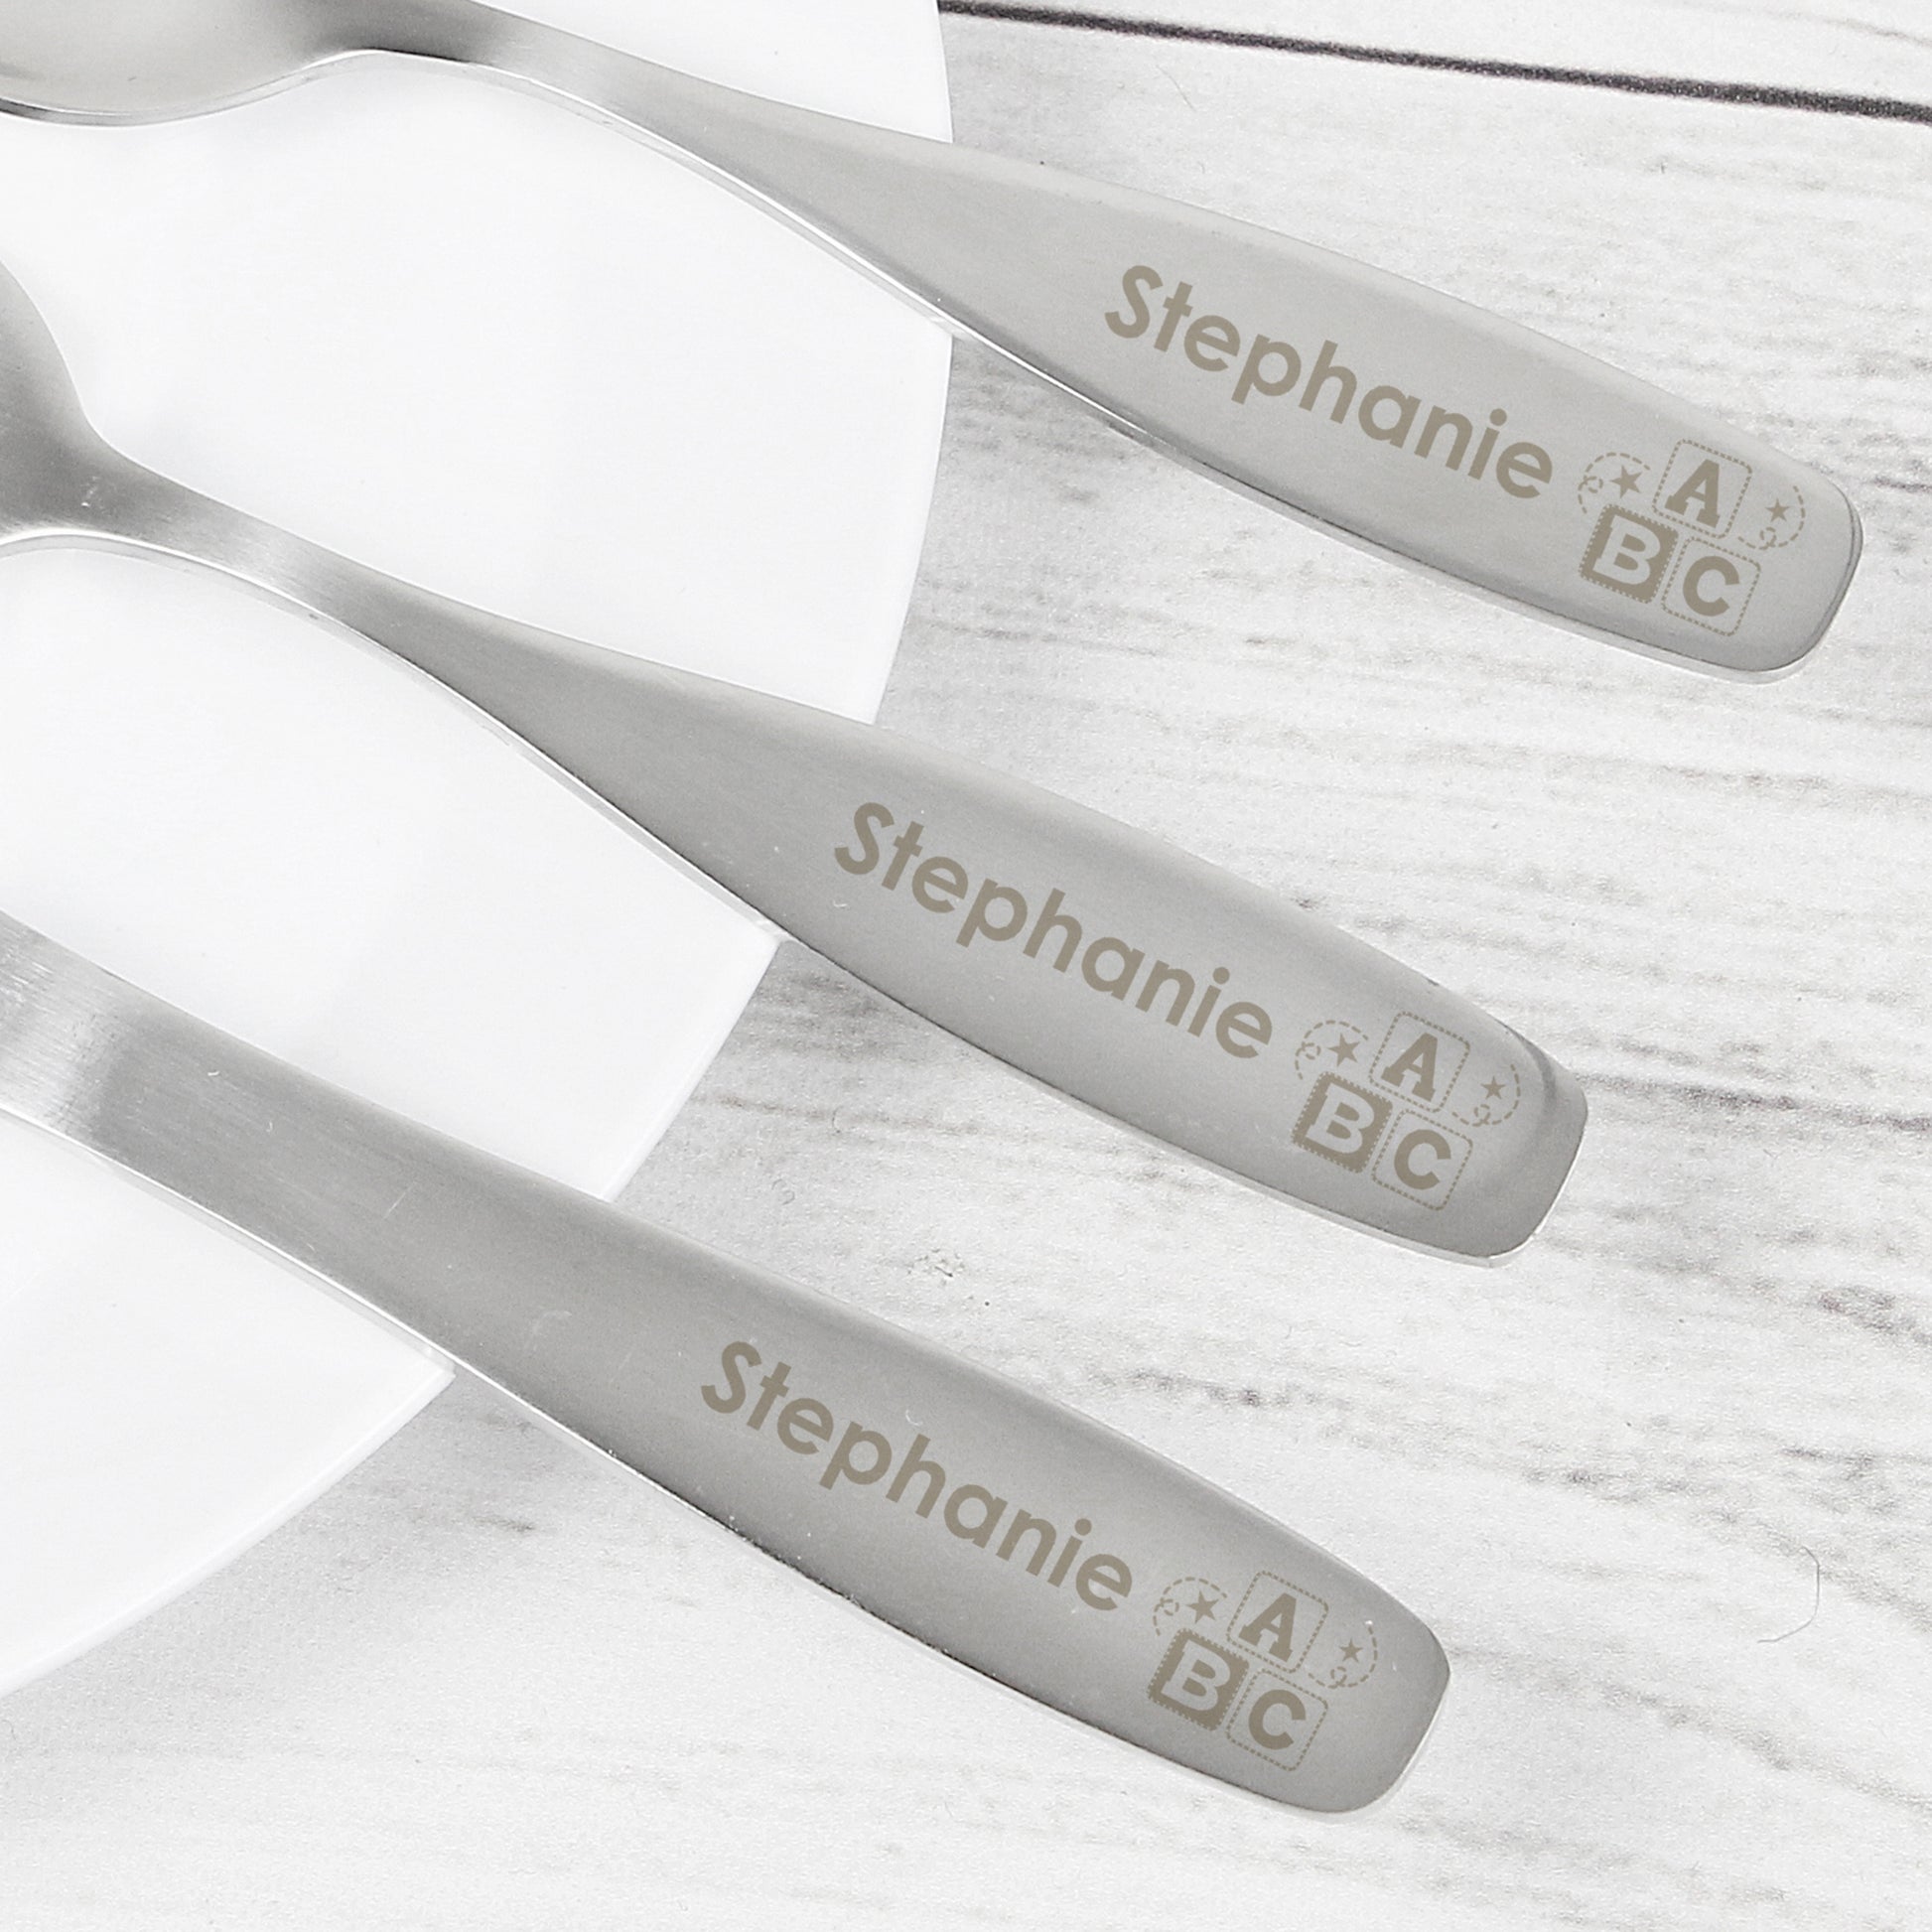 ABC Cutlery Set - Lilybet loves